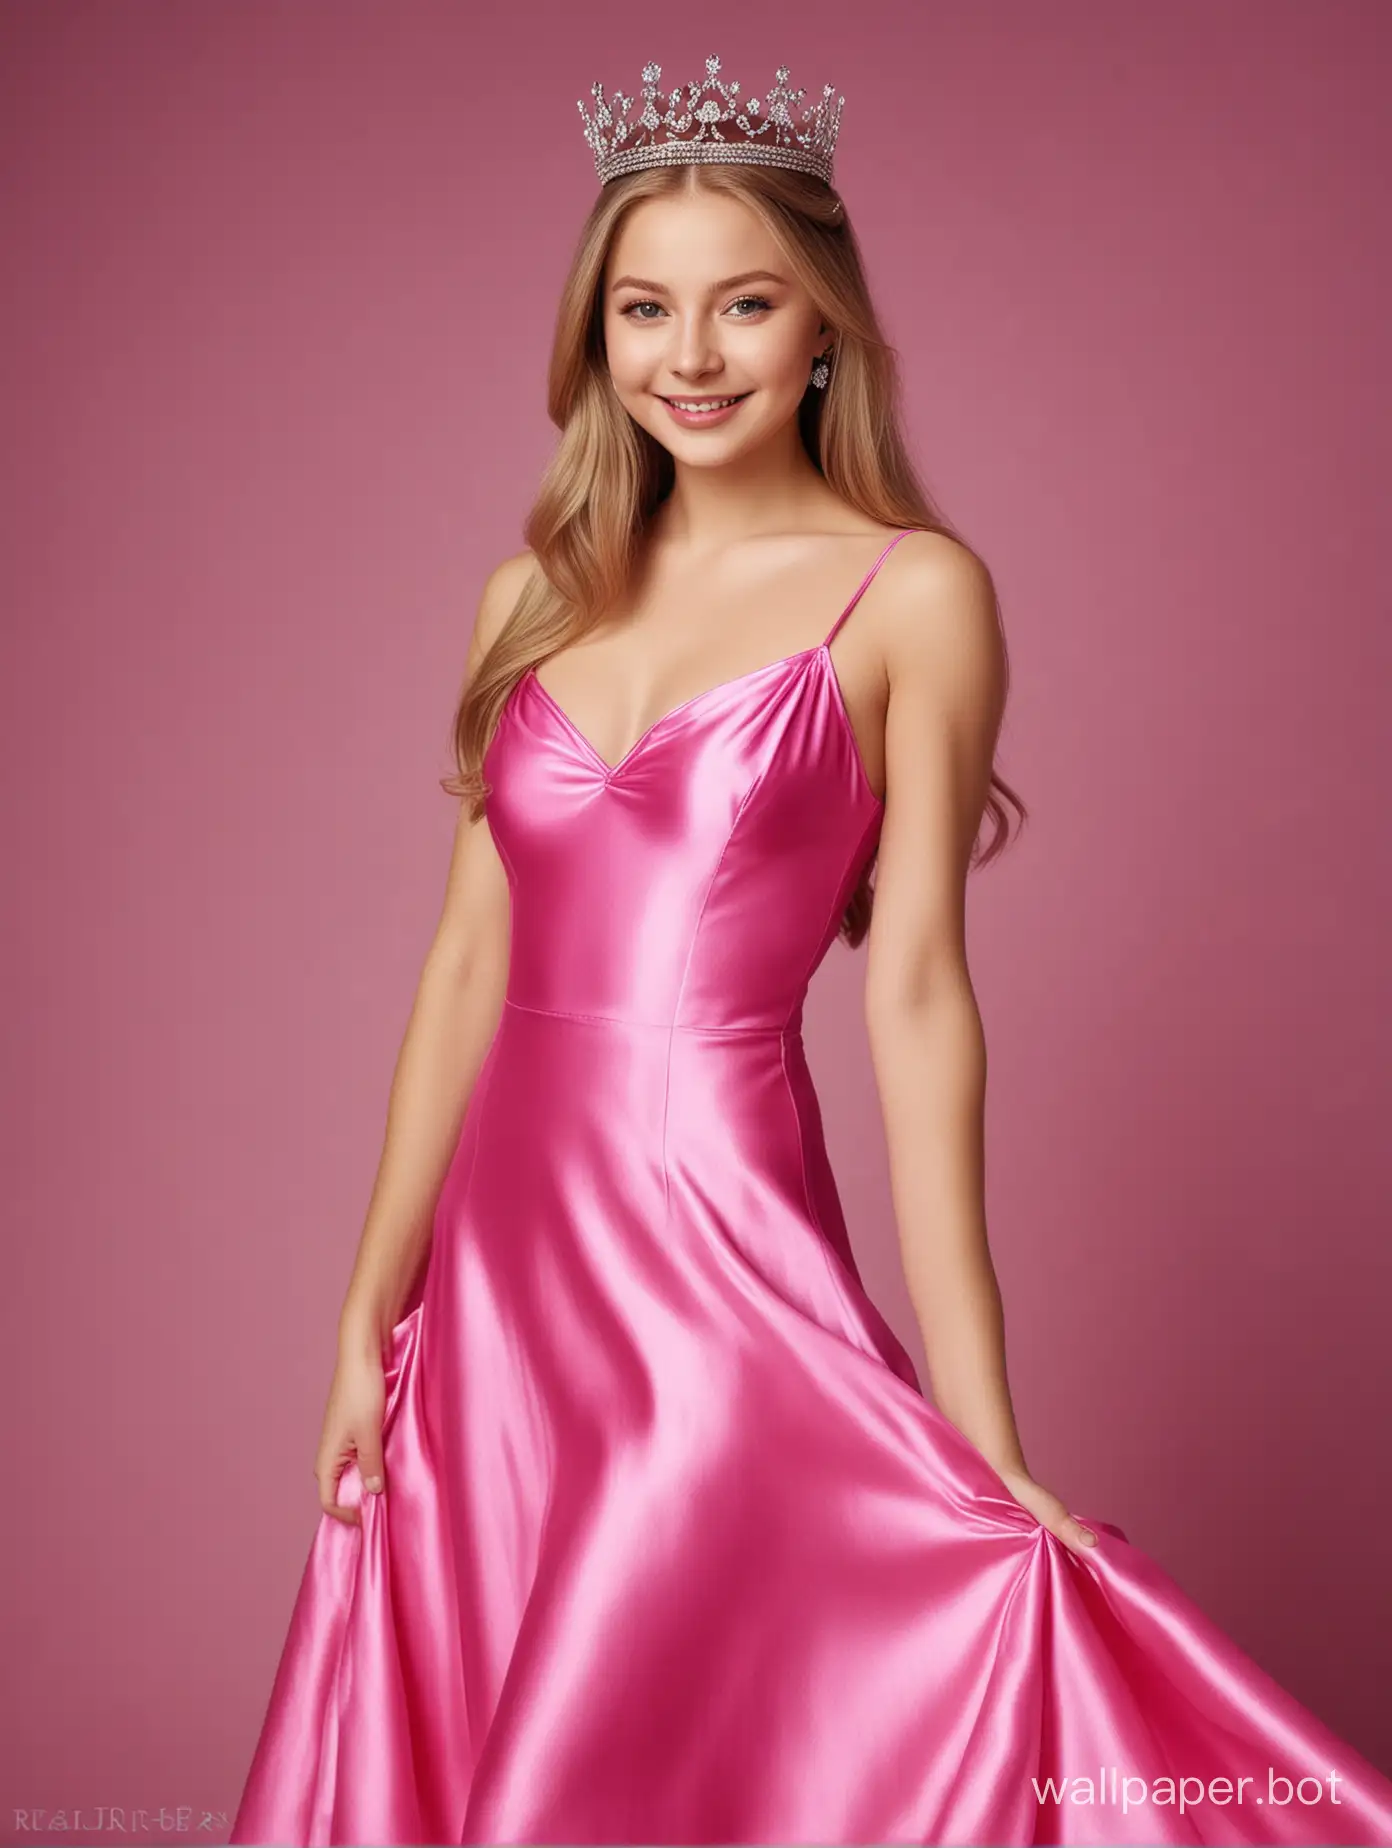 Glamourous Portrait Of Sweet, Young, Sunny Queen Yulia Lipnitskaya With Long Straight Silky Hair Smiling in Luxurious Pink fuchsia Slip Liquid Silk Dress with  crown on the head